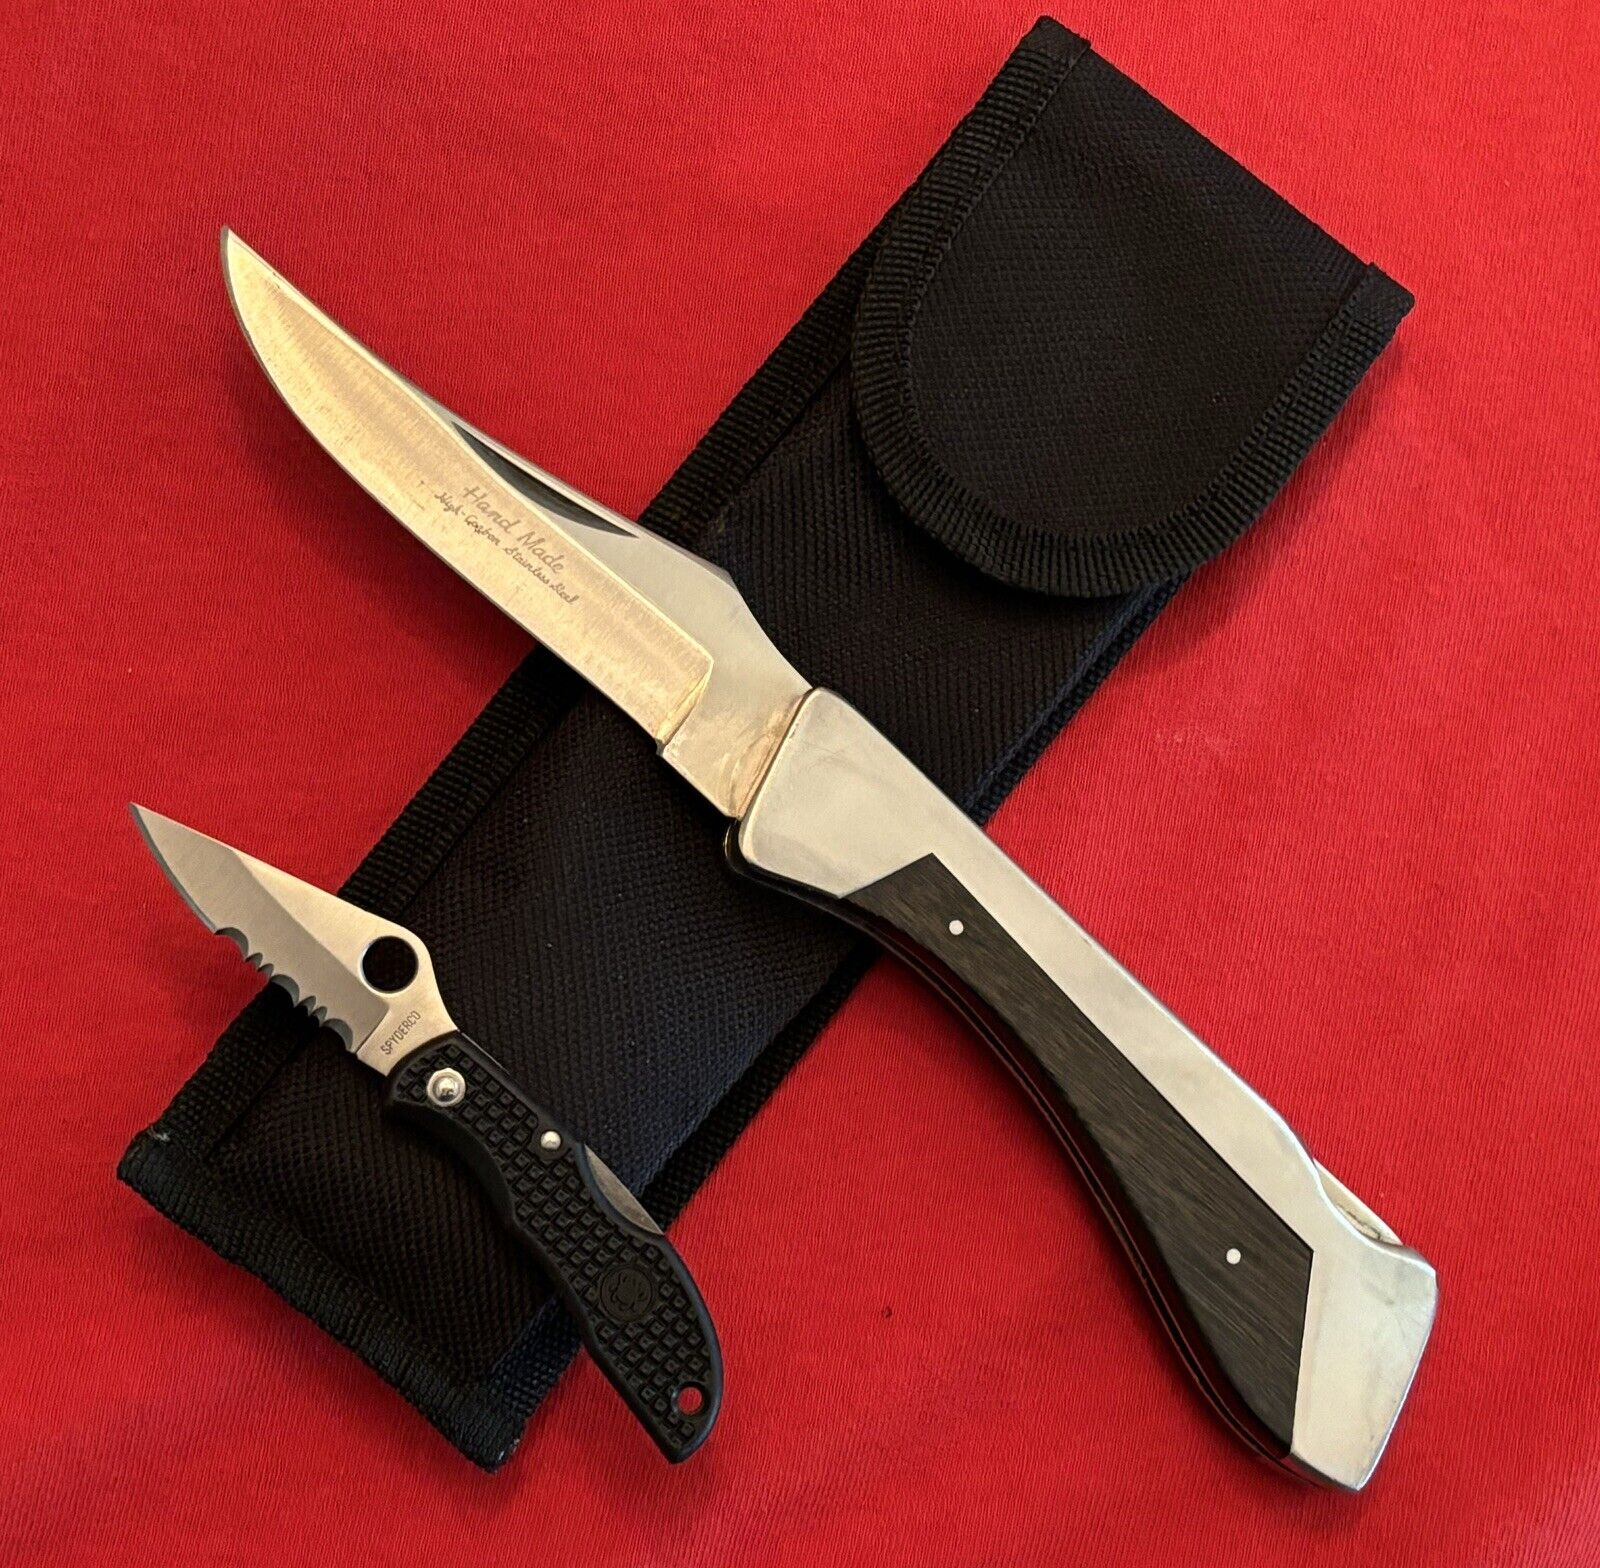 SPYDERCO SERRATED DRAGONFLY & HAND MADE CUSTOM KNIFE - MADE IN JAPAN